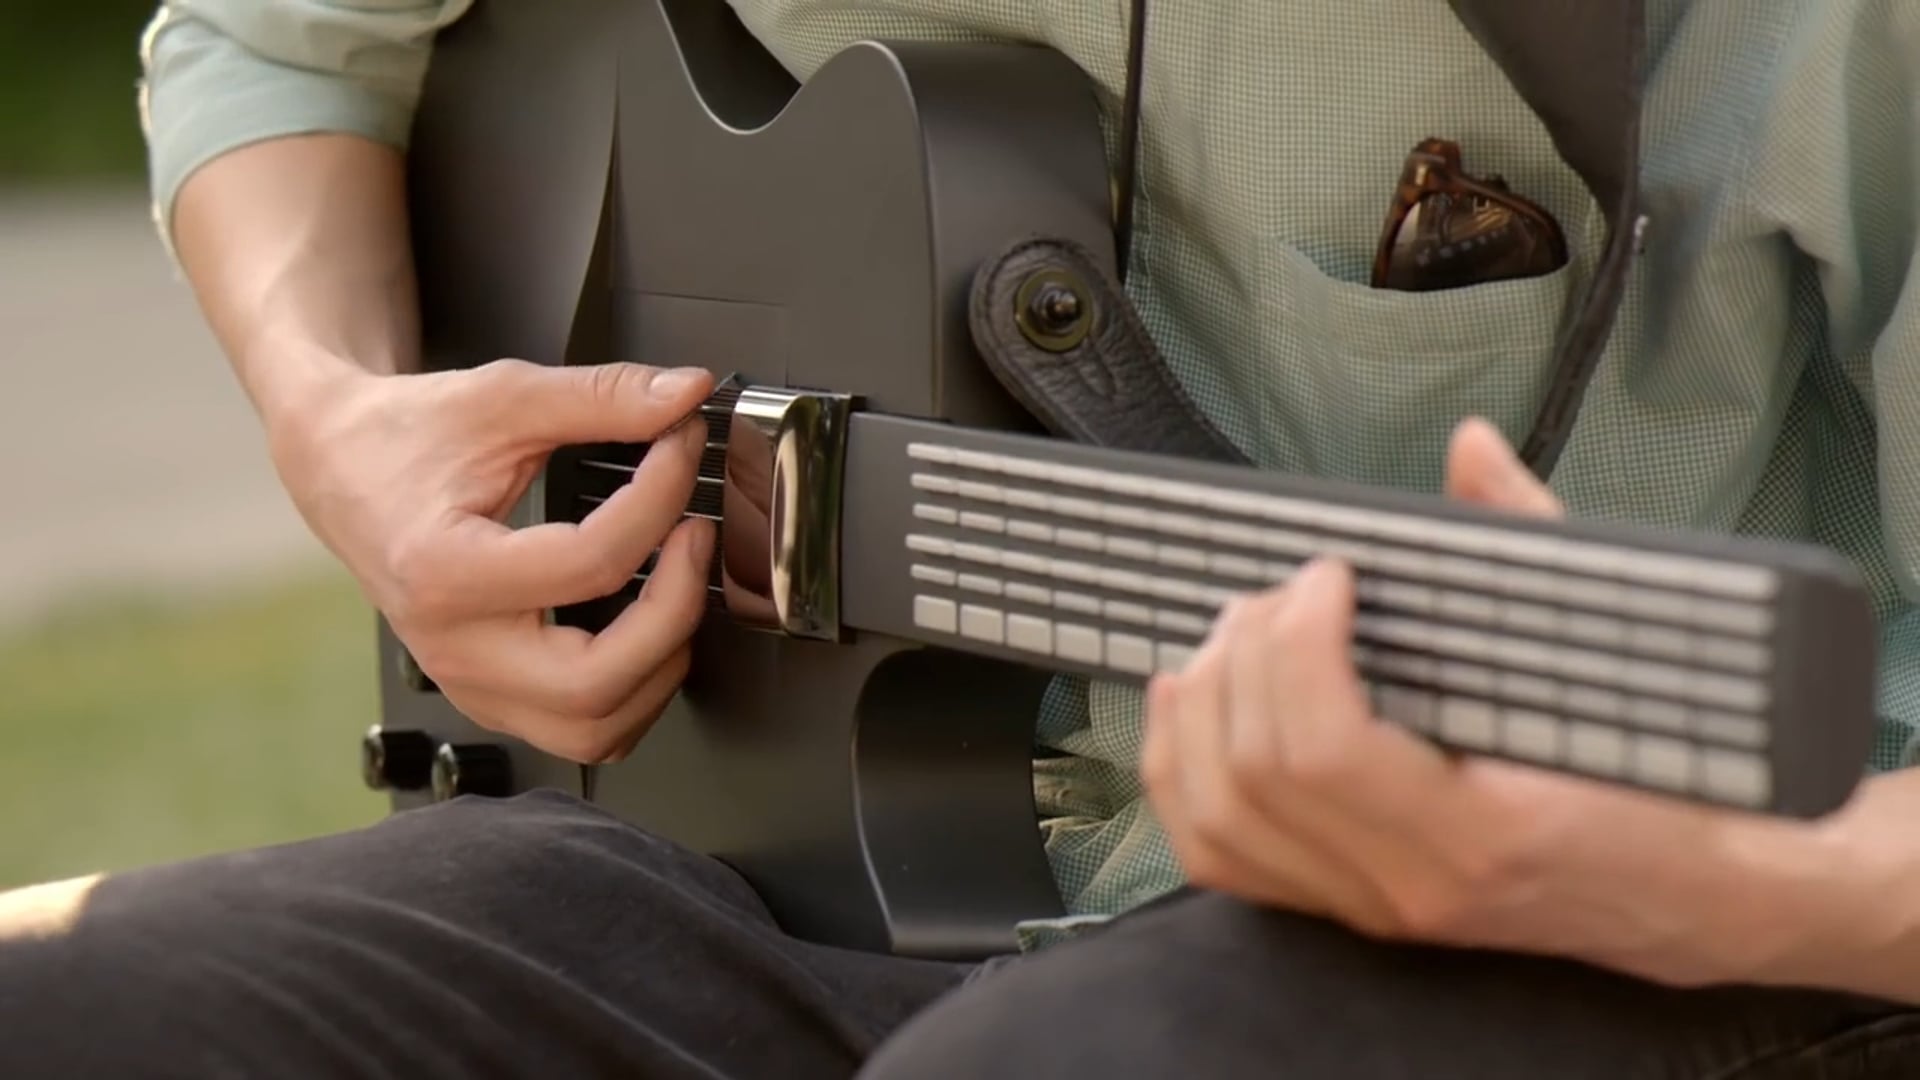 MI Guitar - A new type of guitar you can play in minutes